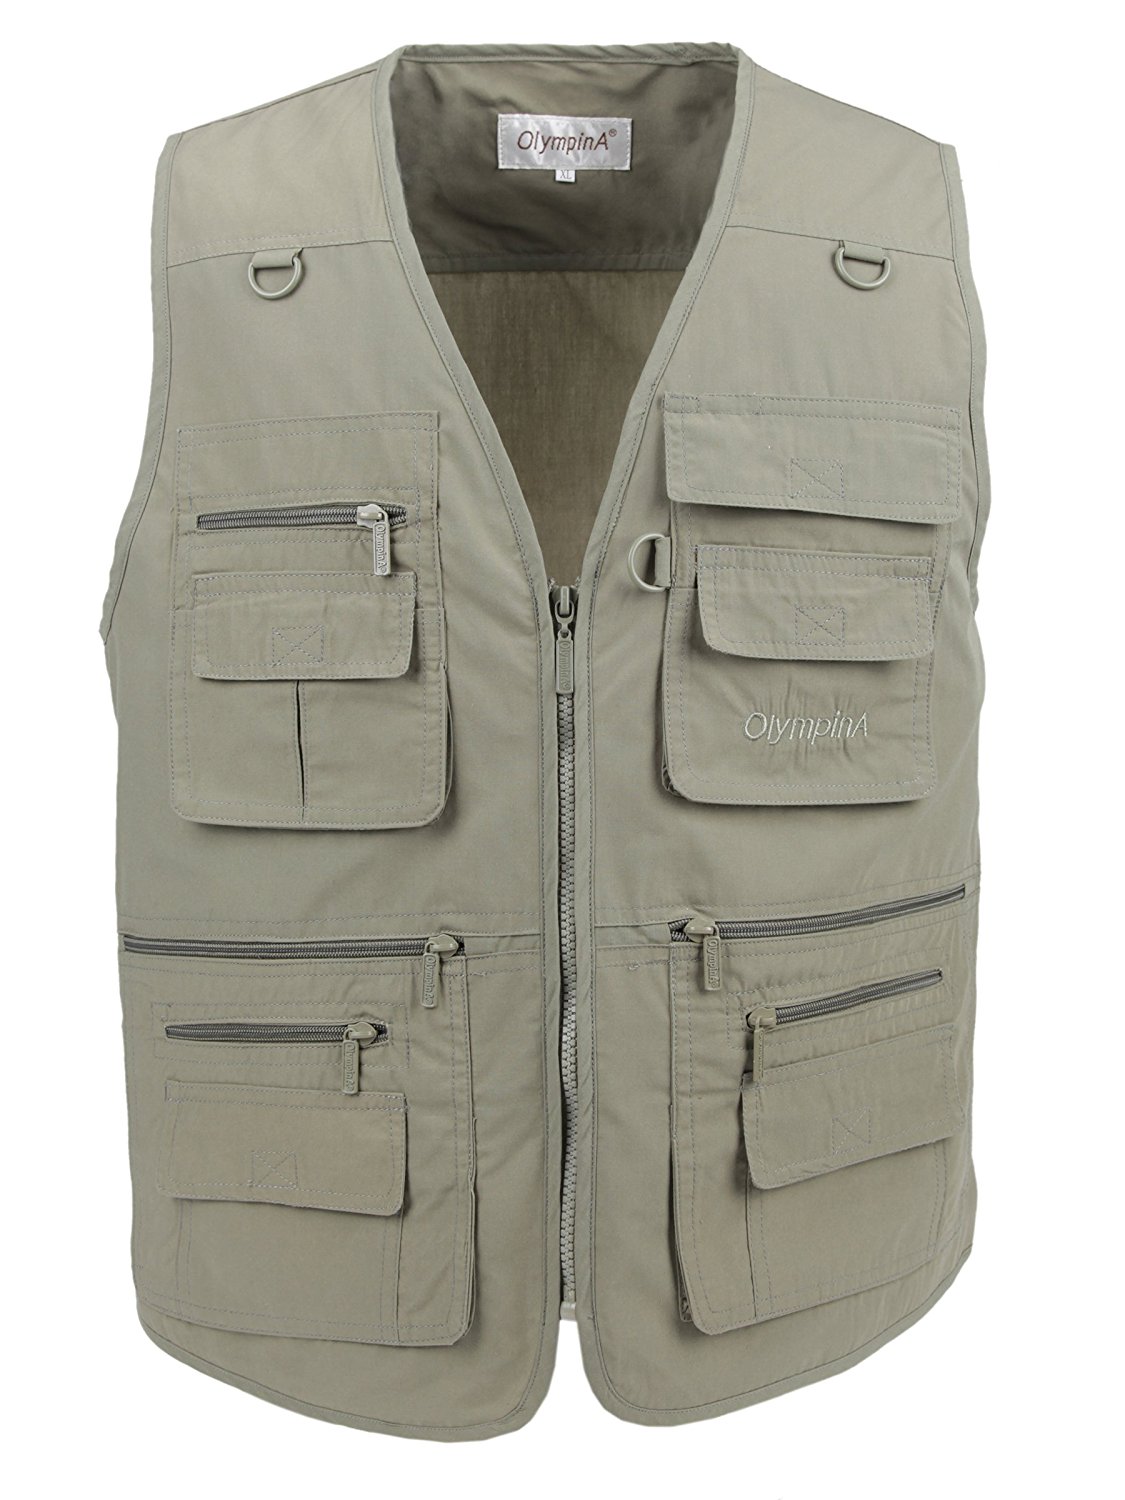 Best Cargo Vests Reviewed & Rated for Quality - TheGearHunt